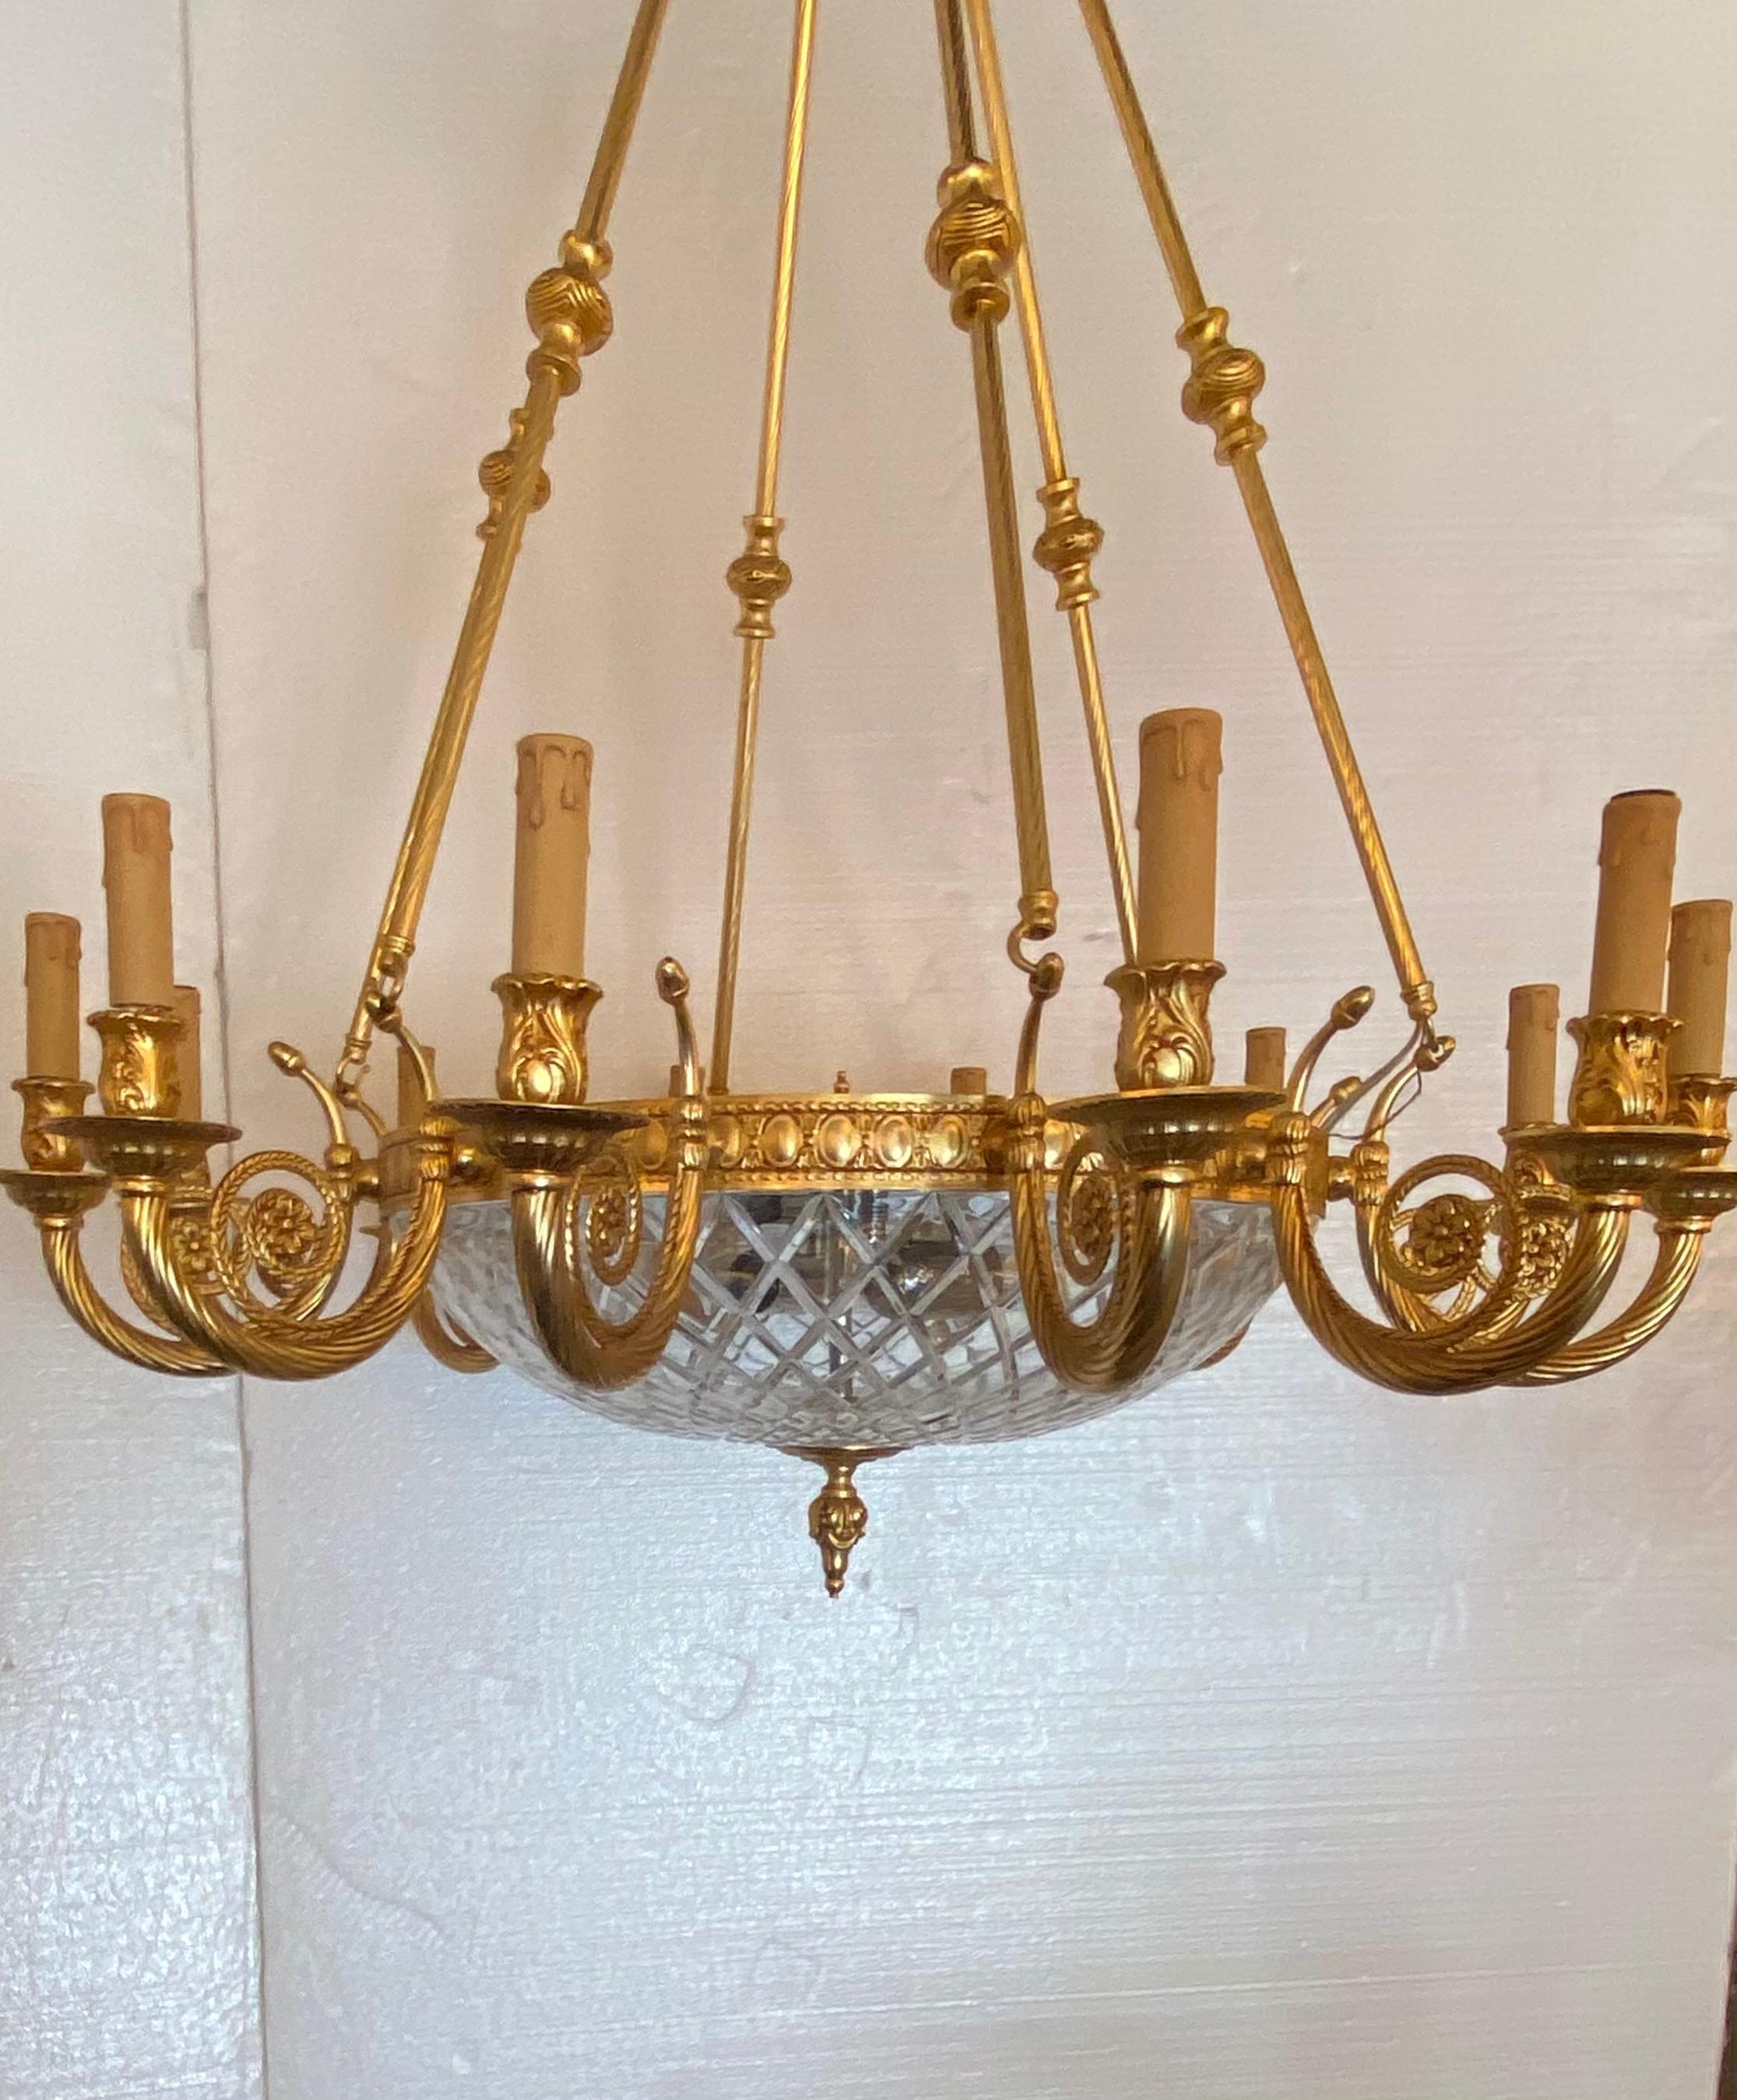 Italian gilt gold chandelier, in excellent conditions, mid-19th century 
14 lights.